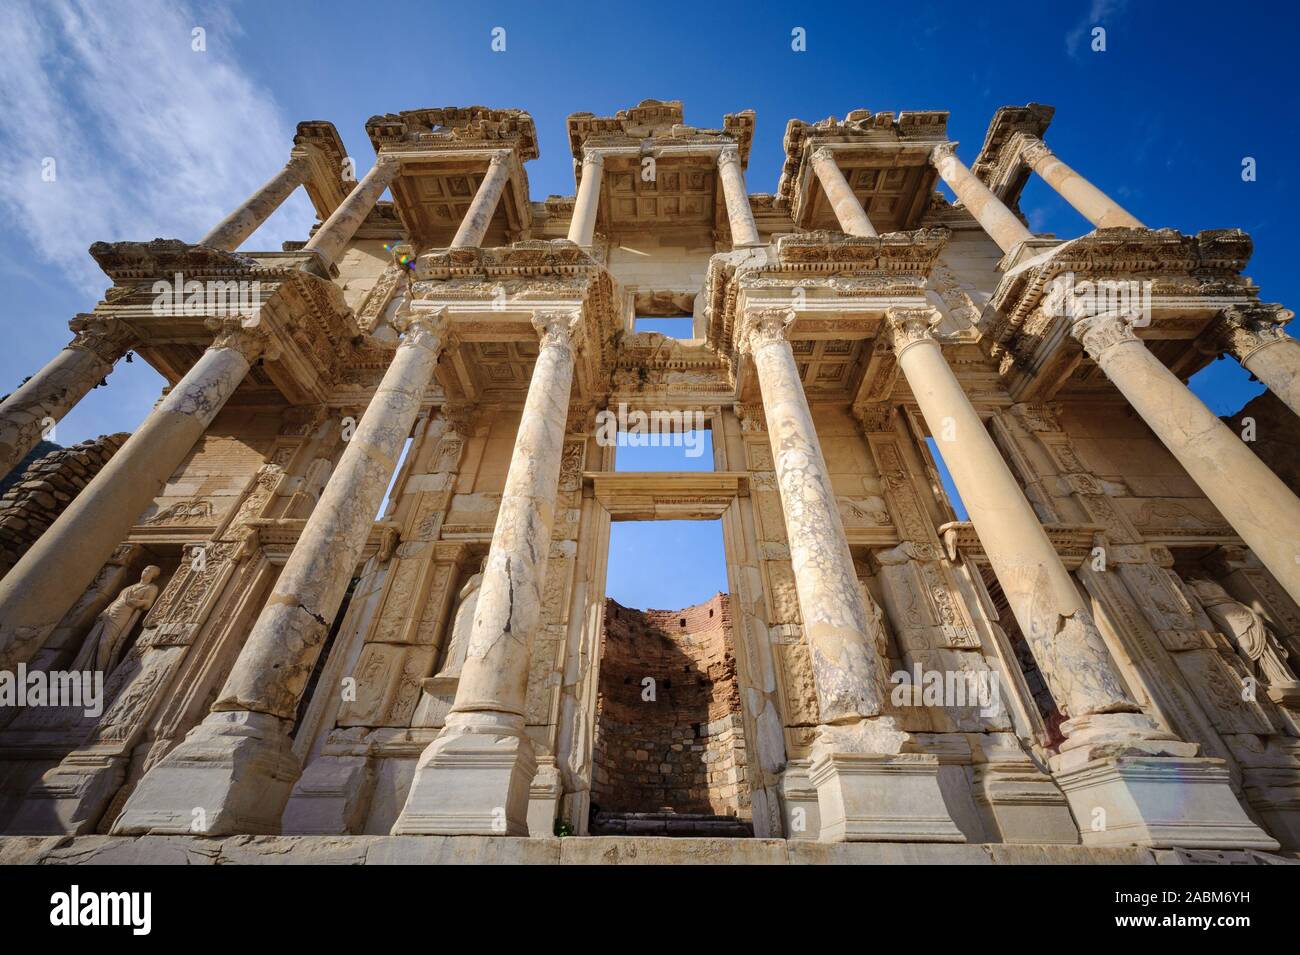 Library of Celsus - ruins of ancient Ephesus in Turkey Stock Photo